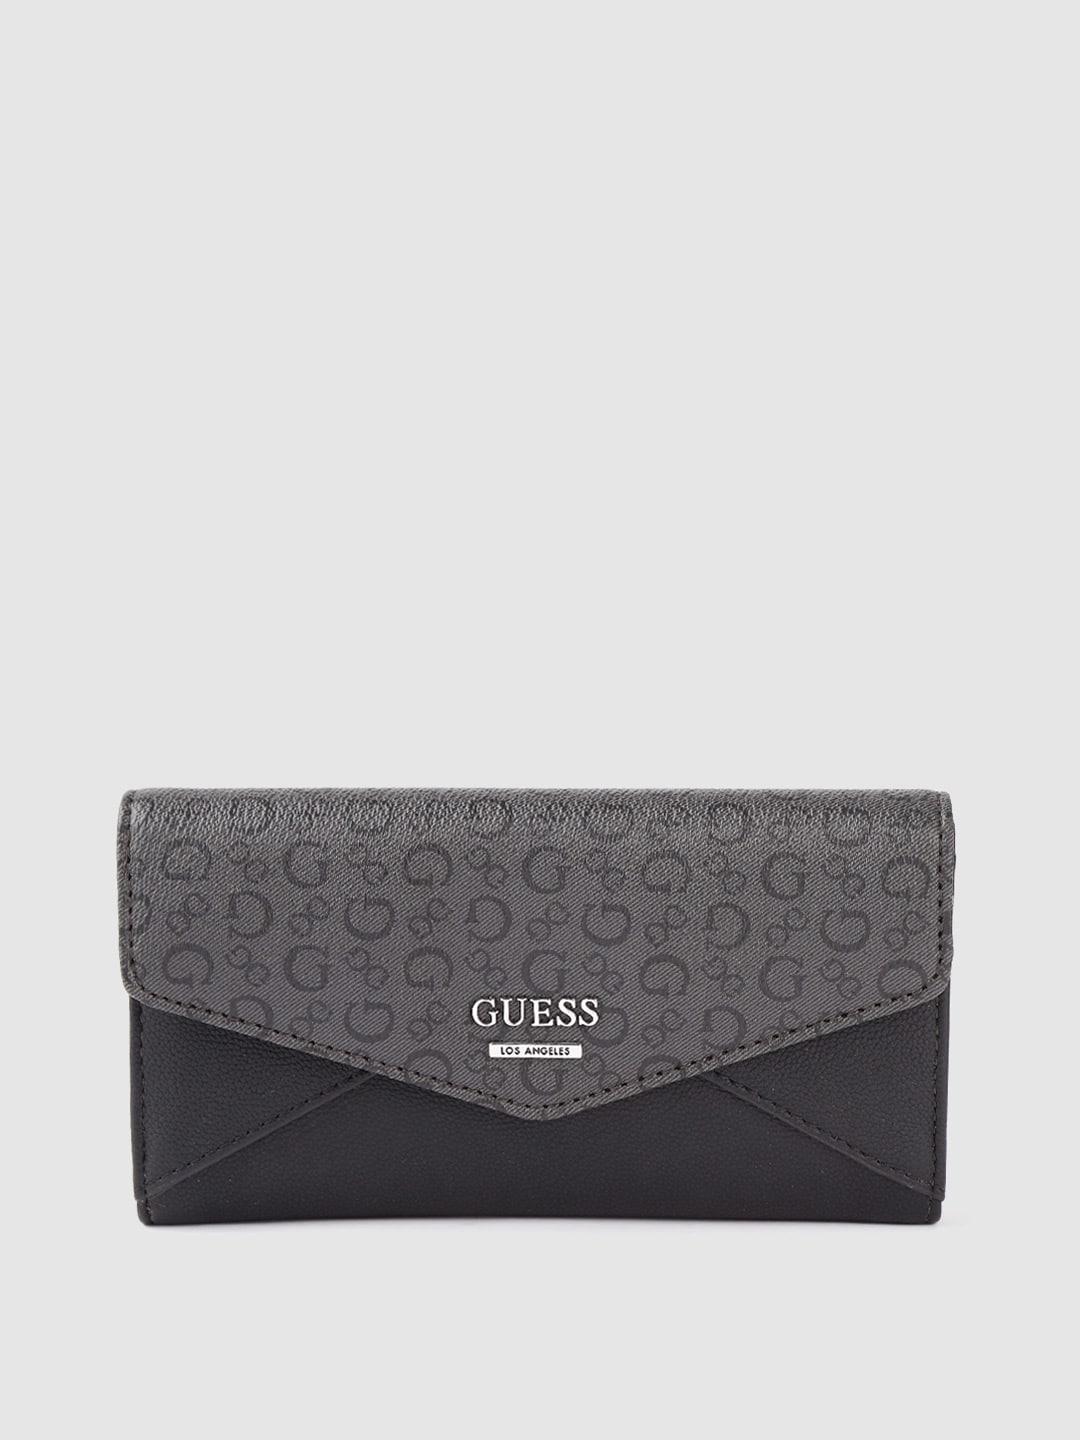 GUESS Women Black & Charcoal Grey Typography Printed Three Fold Wallet with Wrist Loop Price in India